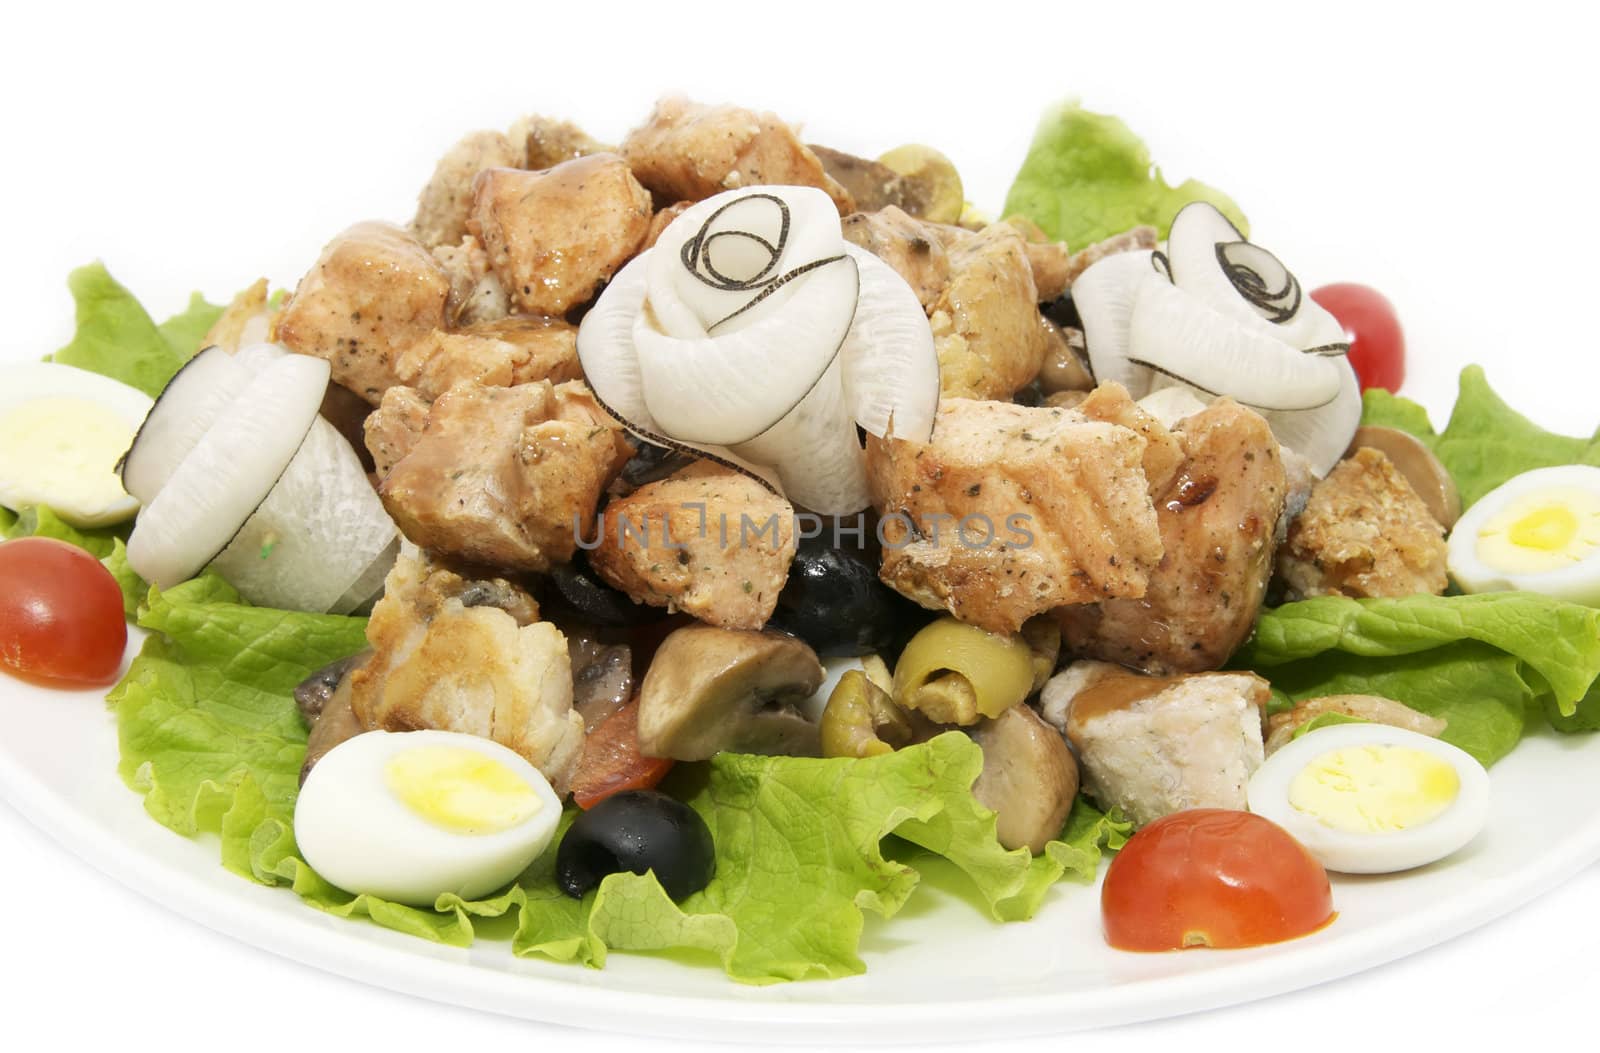 salad of fish and eggs on a white plate in a restaurant